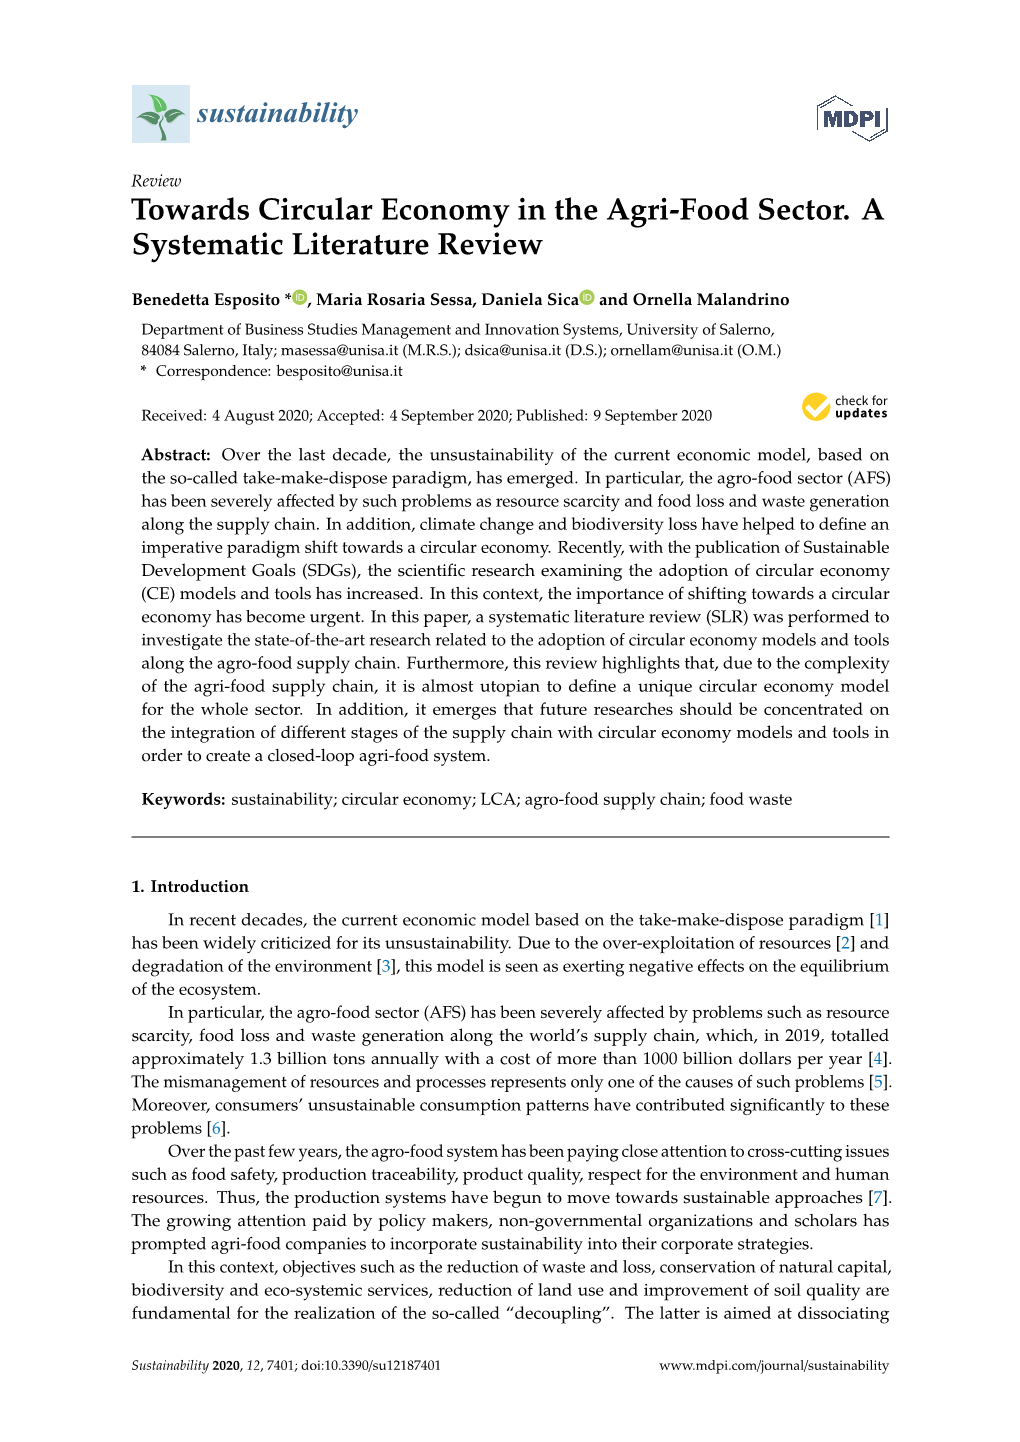 Towards Circular Economy in the Agri-Food Sector. a Systematic Literature Review